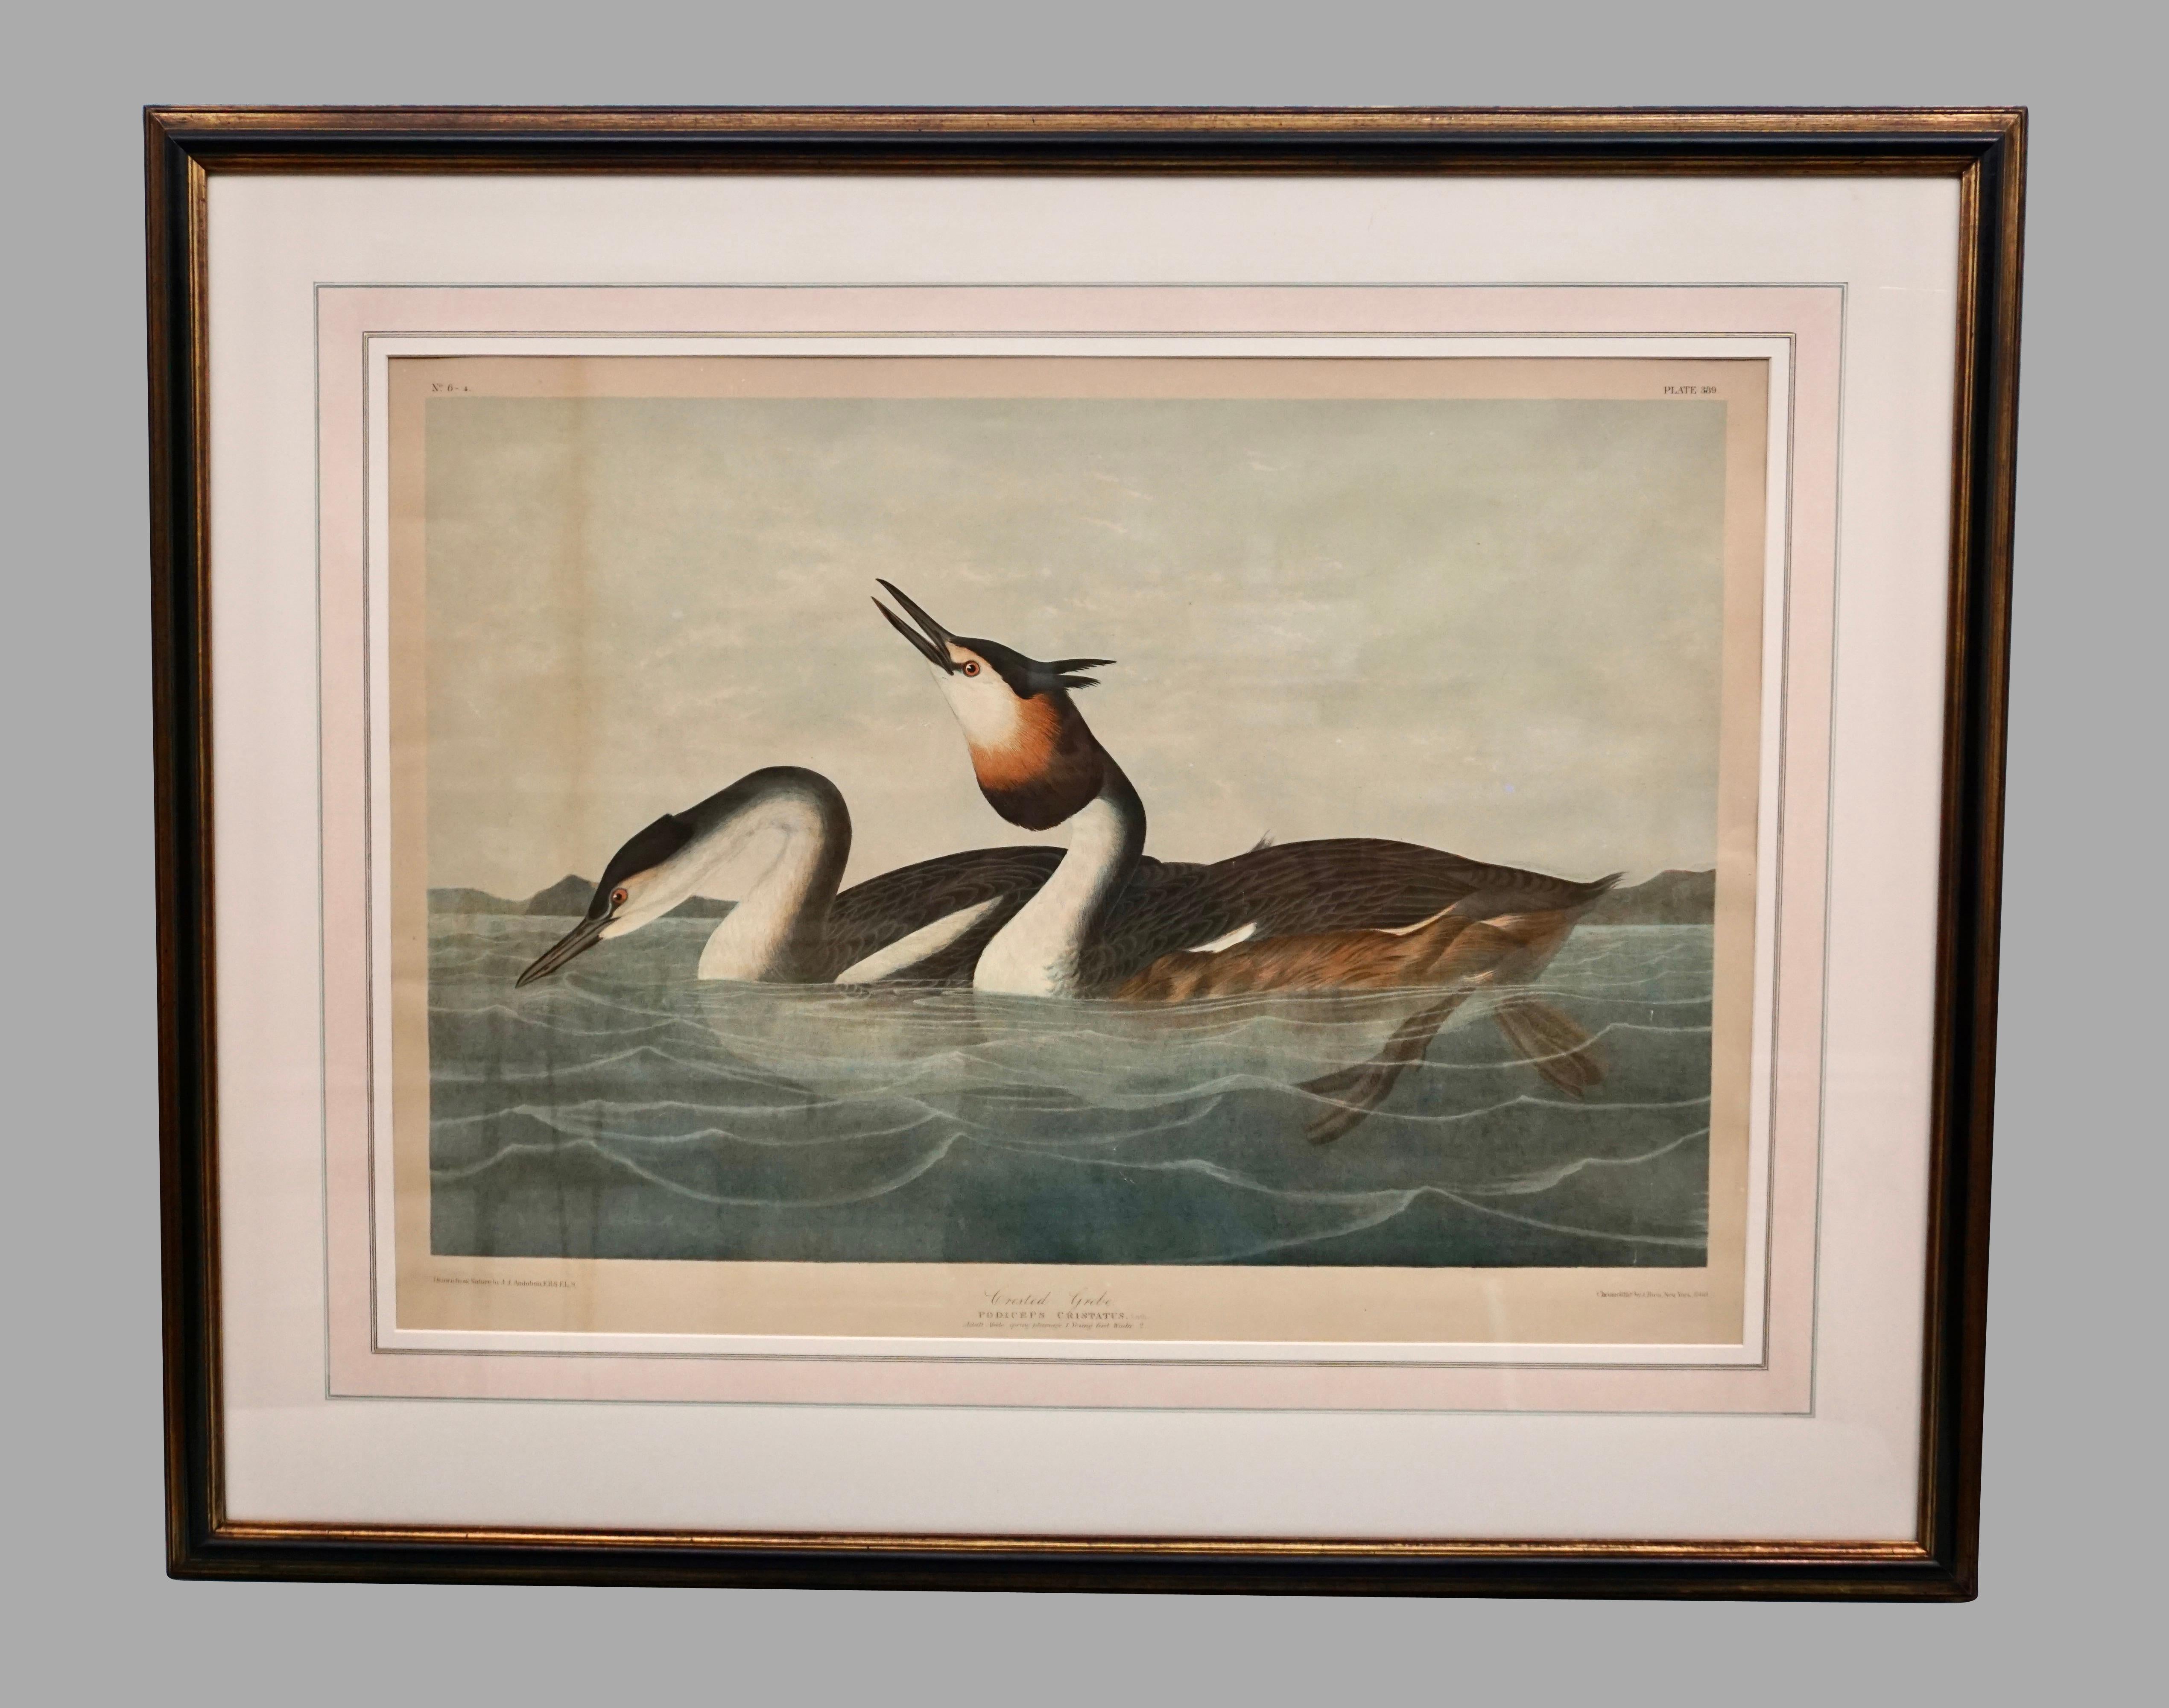 The John James Audubon double elephant folio chromolithograph Plate 389 No. 6-4 Crested Grebe from Birds of America. Podiceps Cristatus. Adult male spring plumage 1. Drawn from nature by J.J. Audubon, F.R.S. F.L.S. Chromolithograph by J. Bien, New